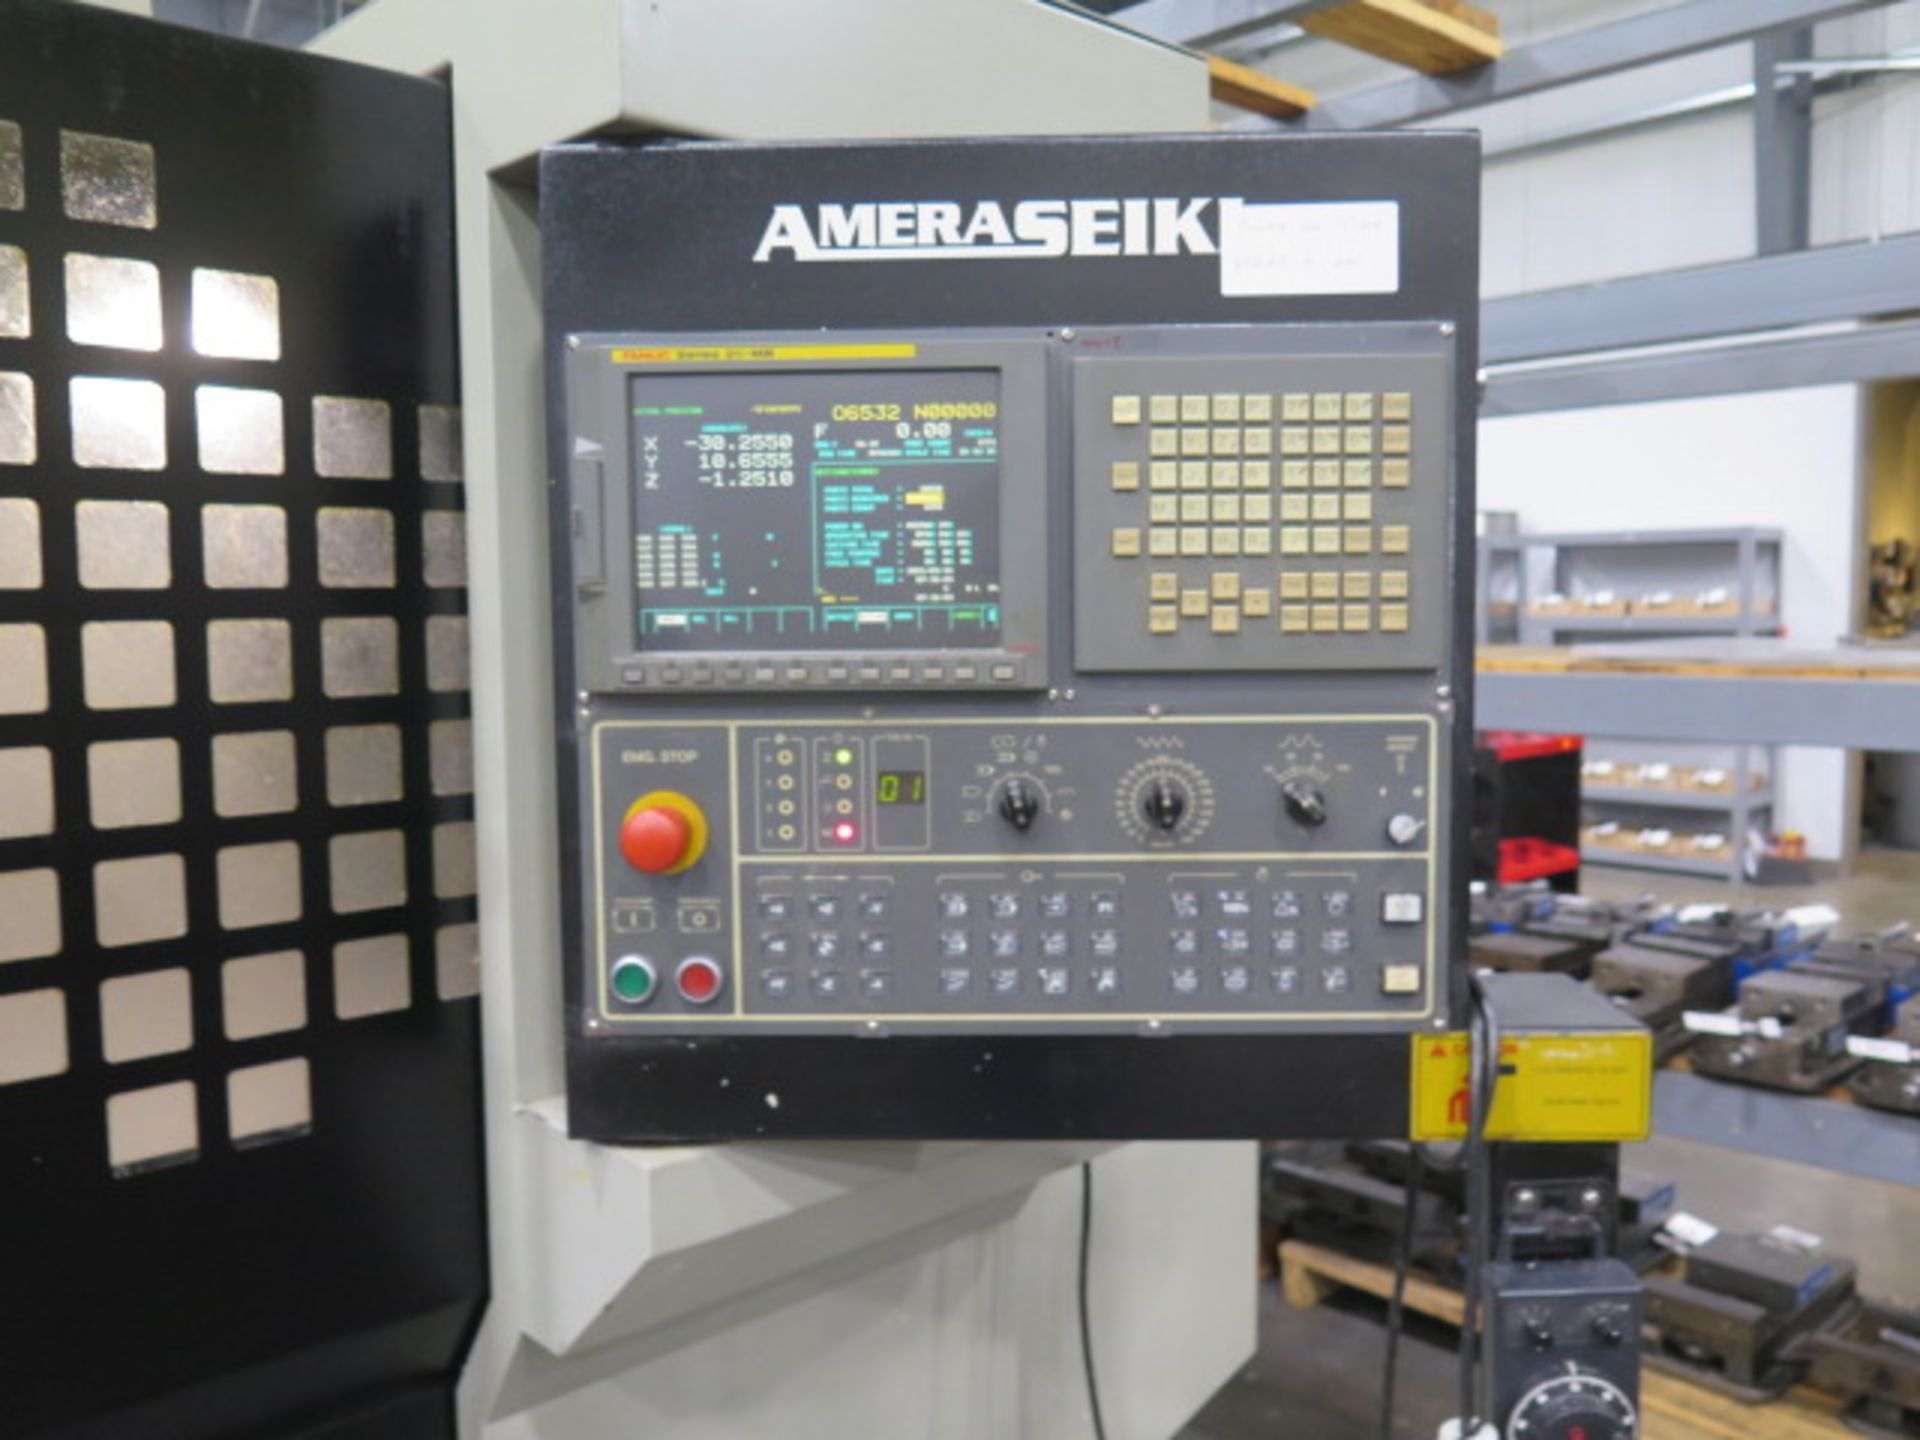 Amera Seiki A-3 CNC Vertical Machining Center w/ Fanuc Series 21i-MB Controls, SOLD AS IS - Image 10 of 16